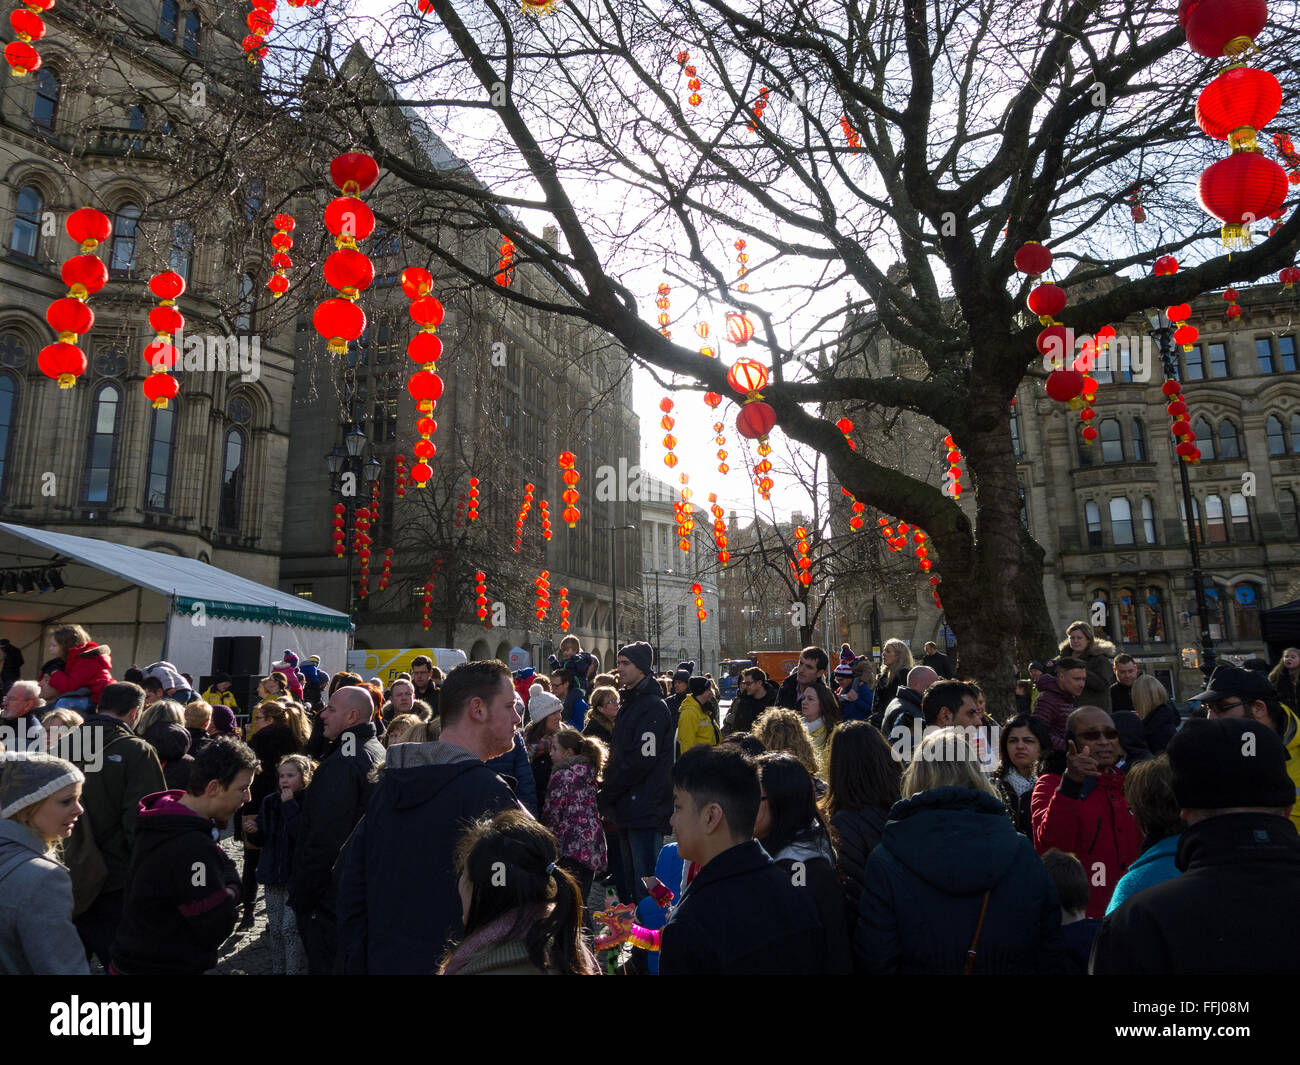 Crowds gather for Chinese New Year celebrations in Manchester Stock Photo